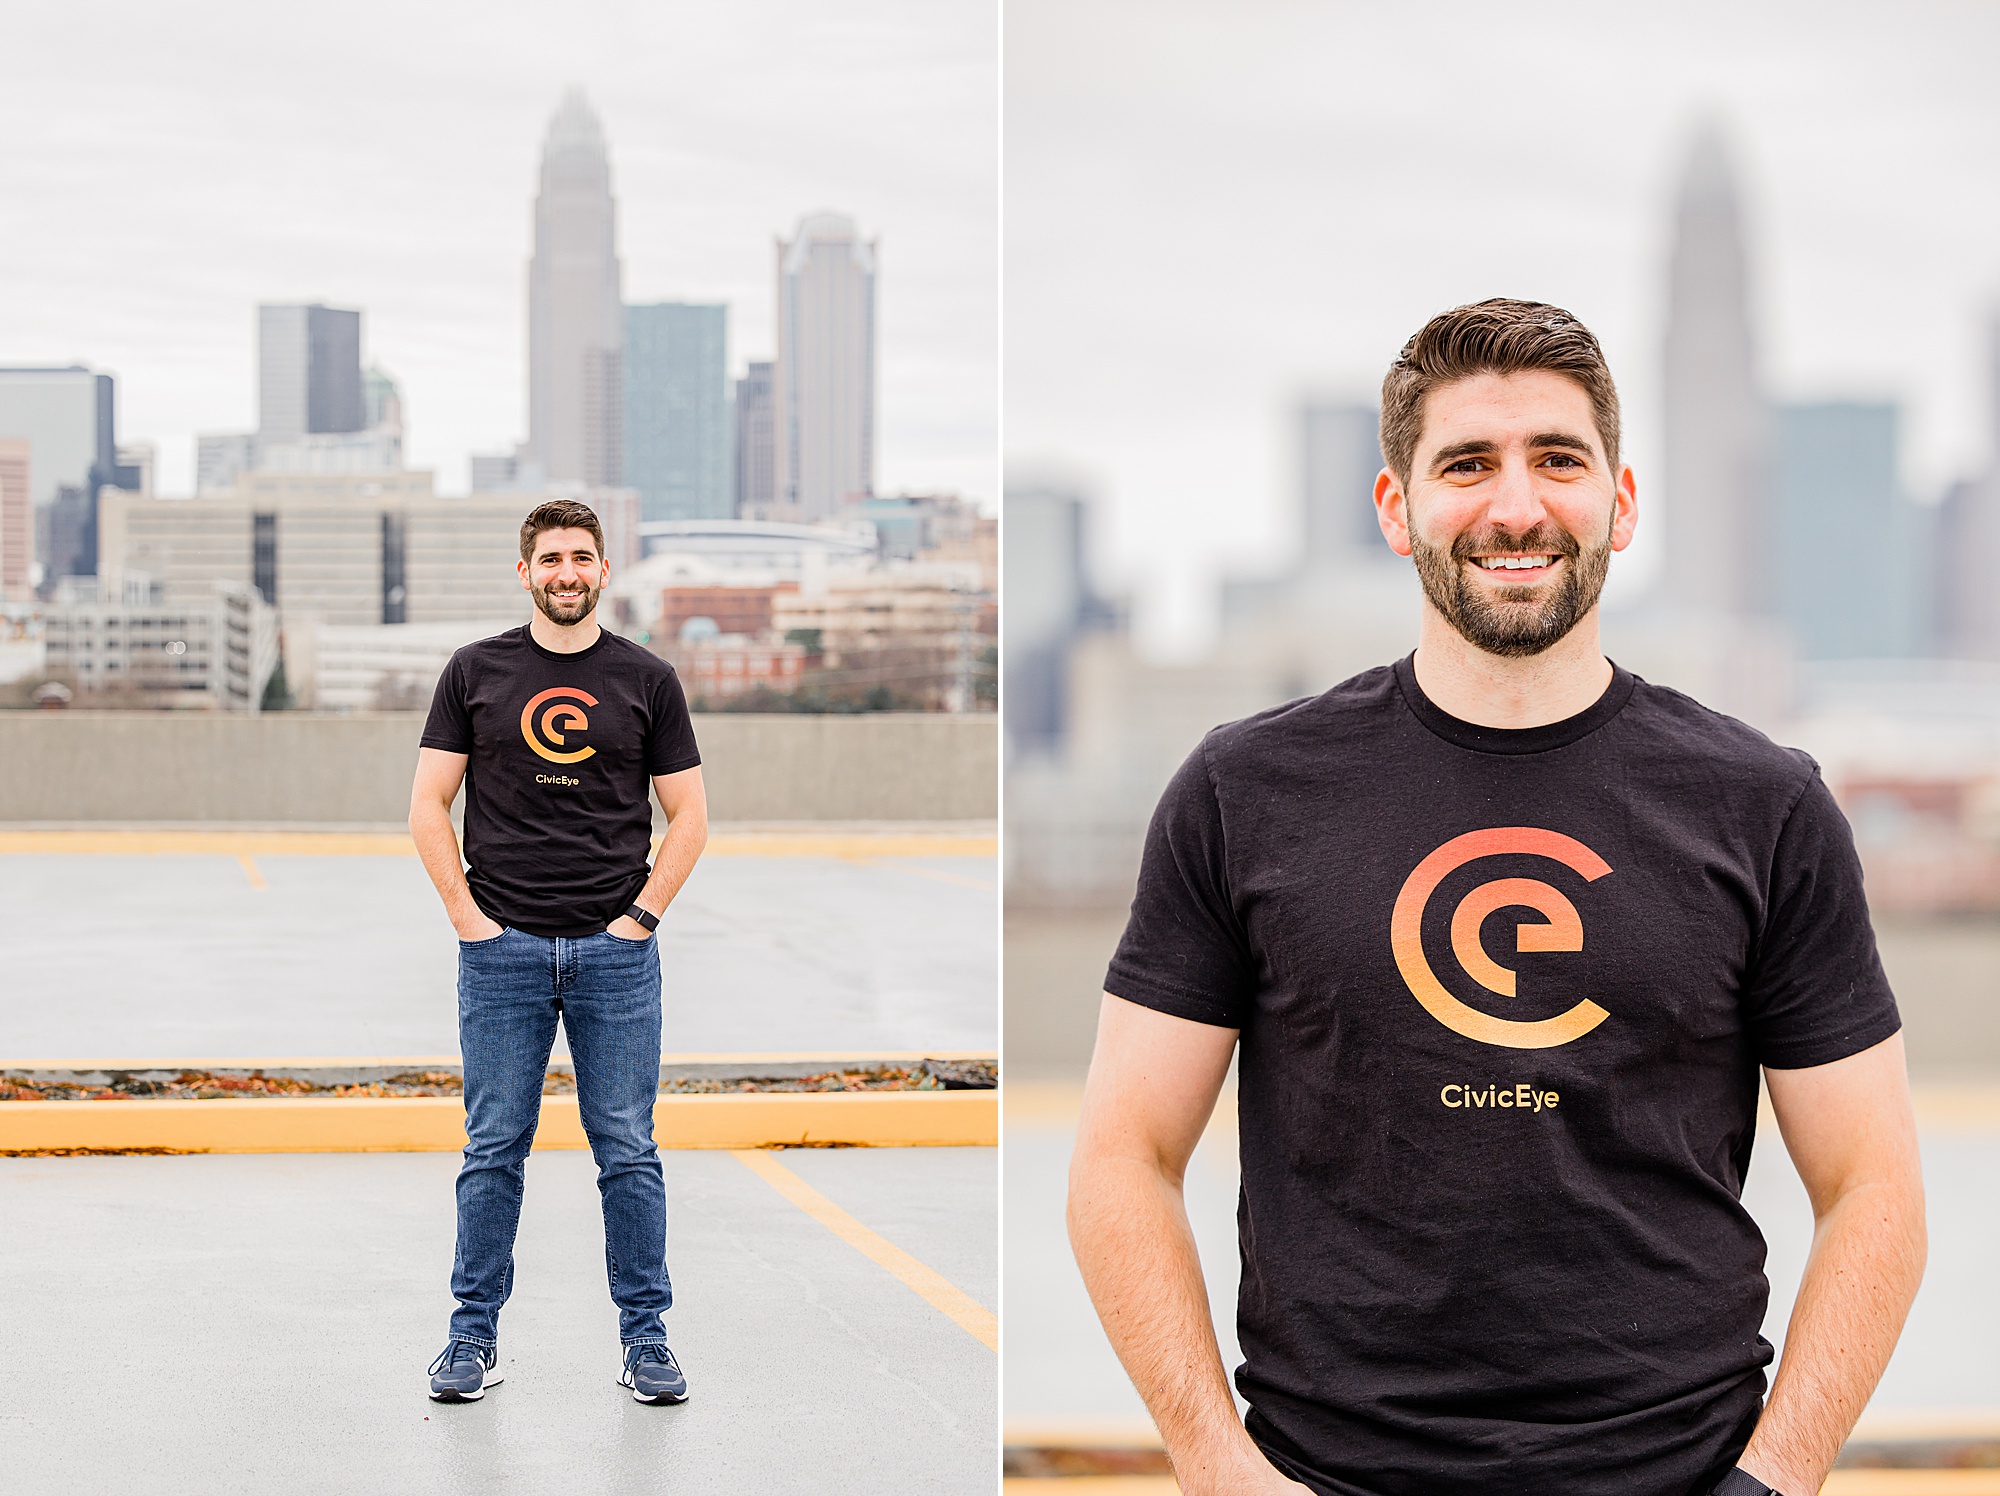 man poses in company shirt with Charlotte skyline behind him